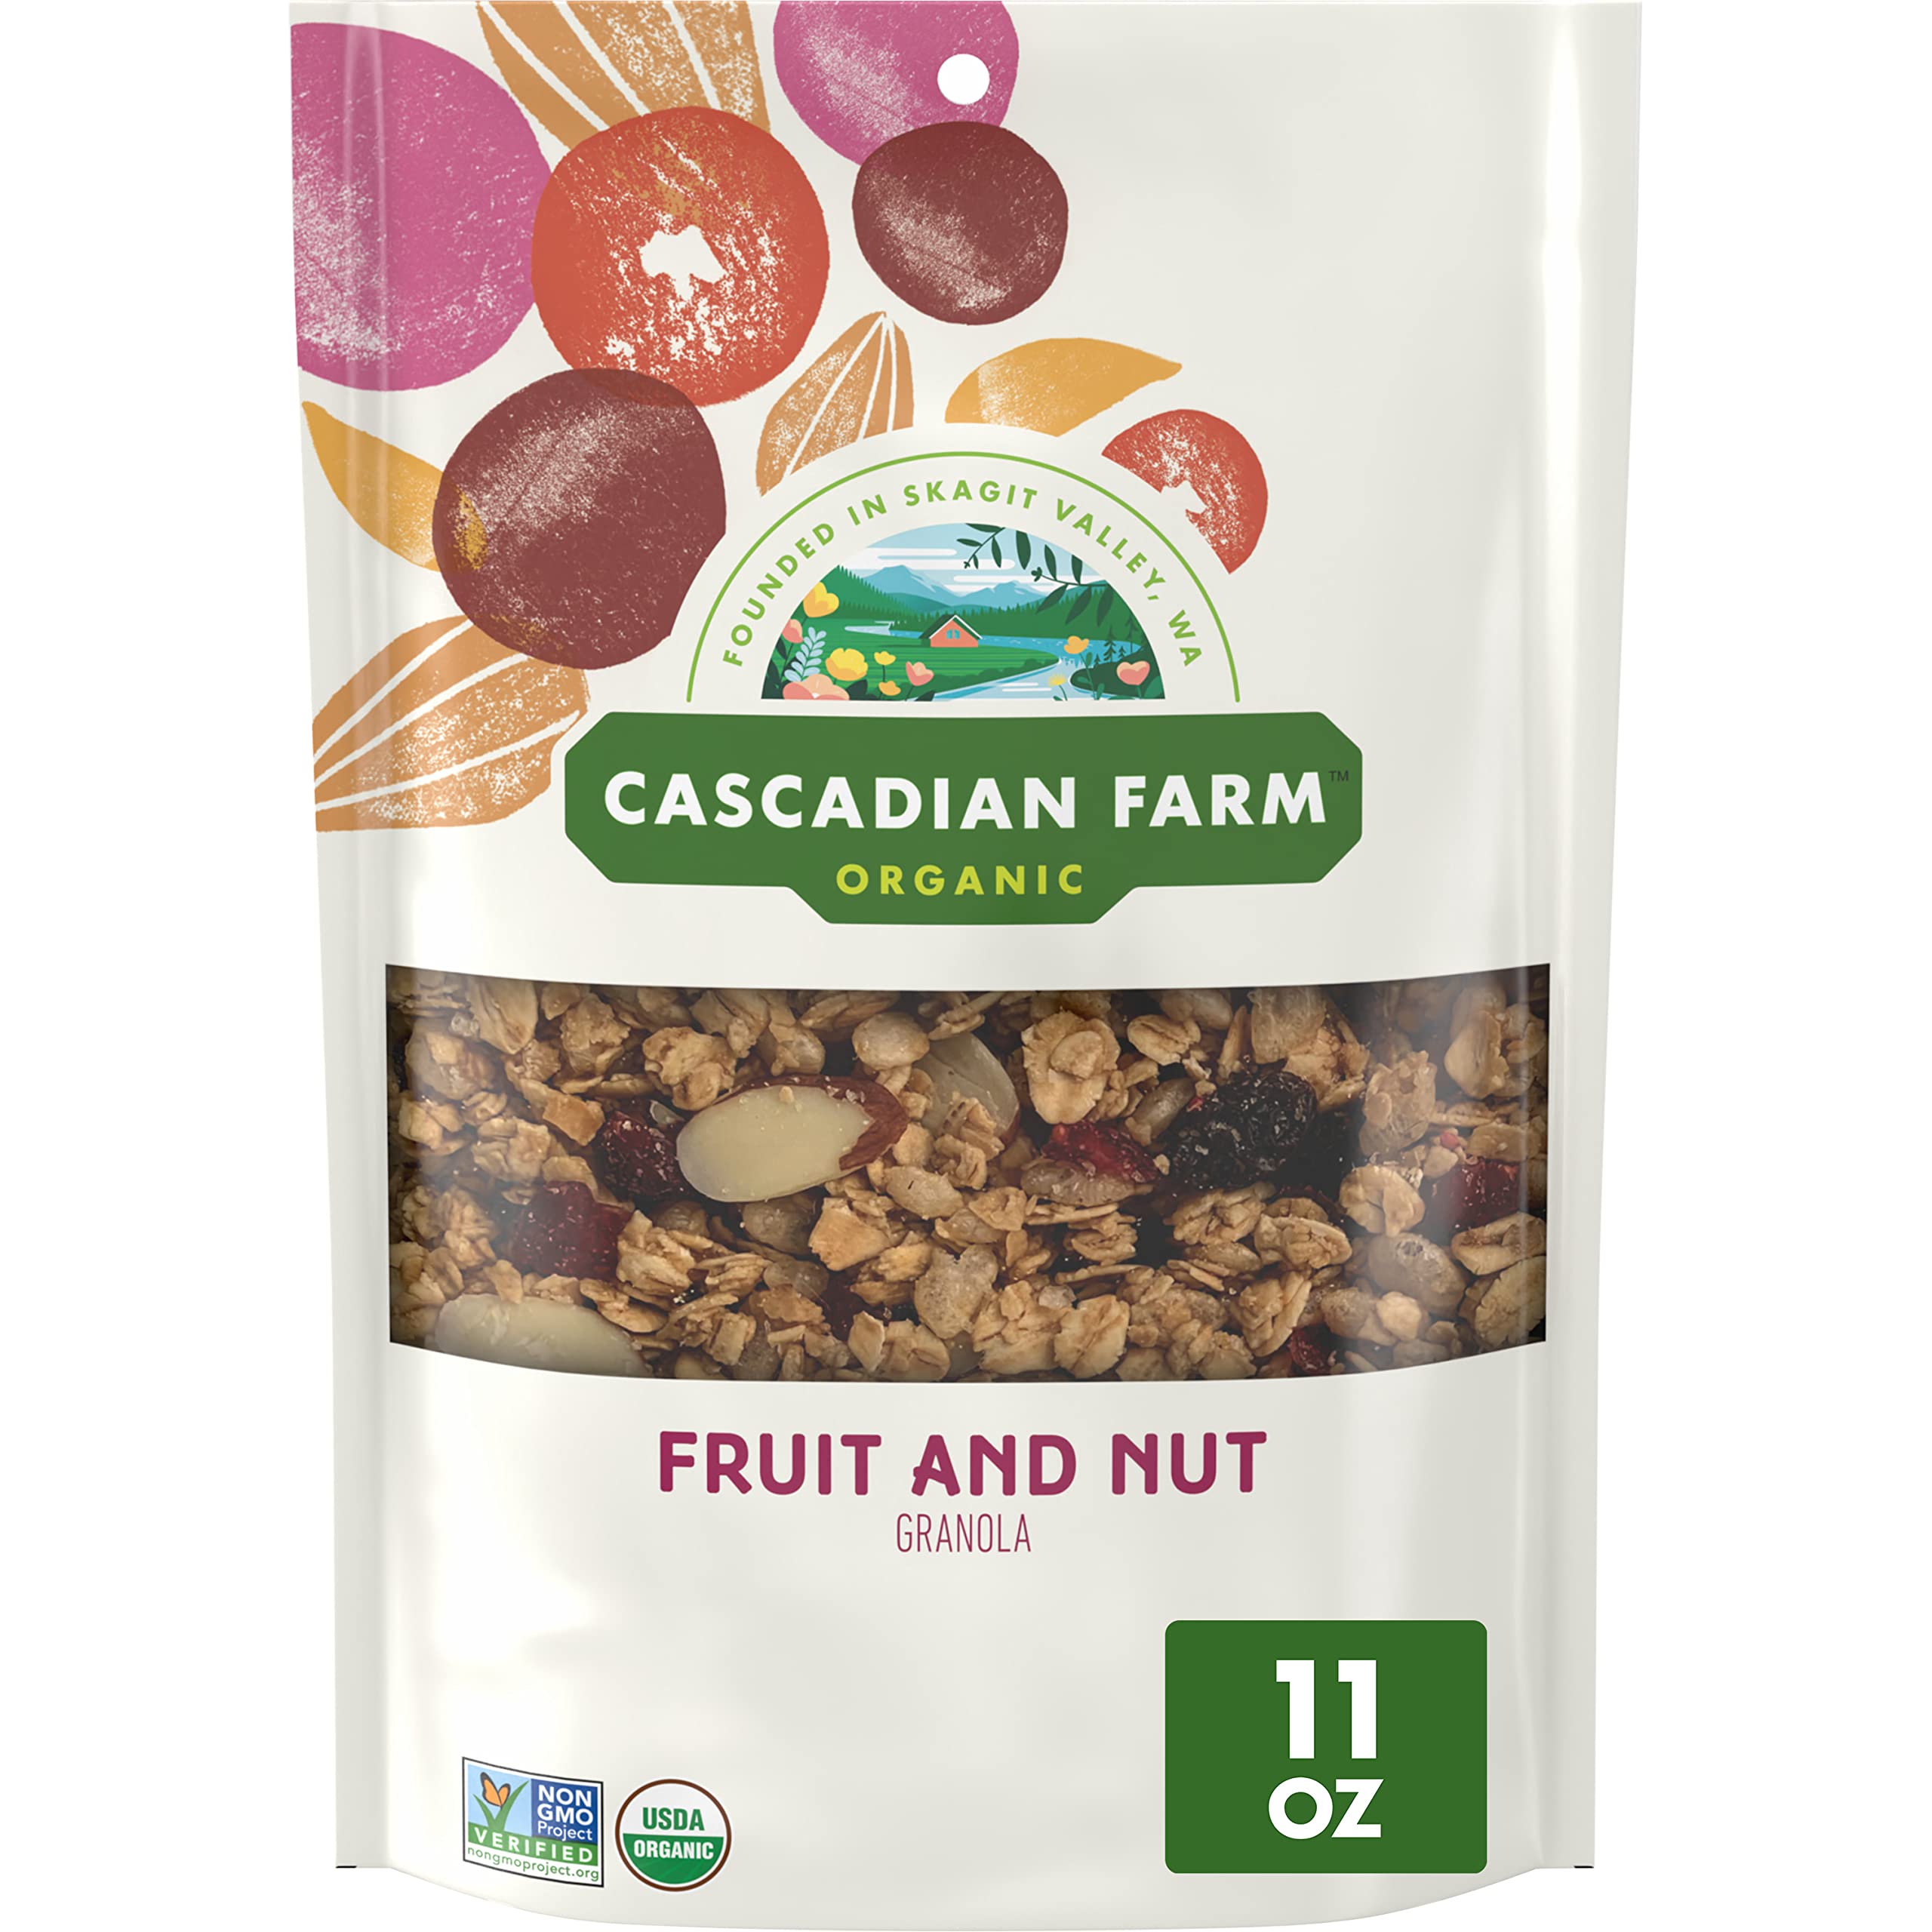 11-Oz Cascadian Farm Organic Granola Resealable Pouch (Fruit and Nut Cereal) $3.02 w/ S&S + Free Shipping w/ Prime or on $35+